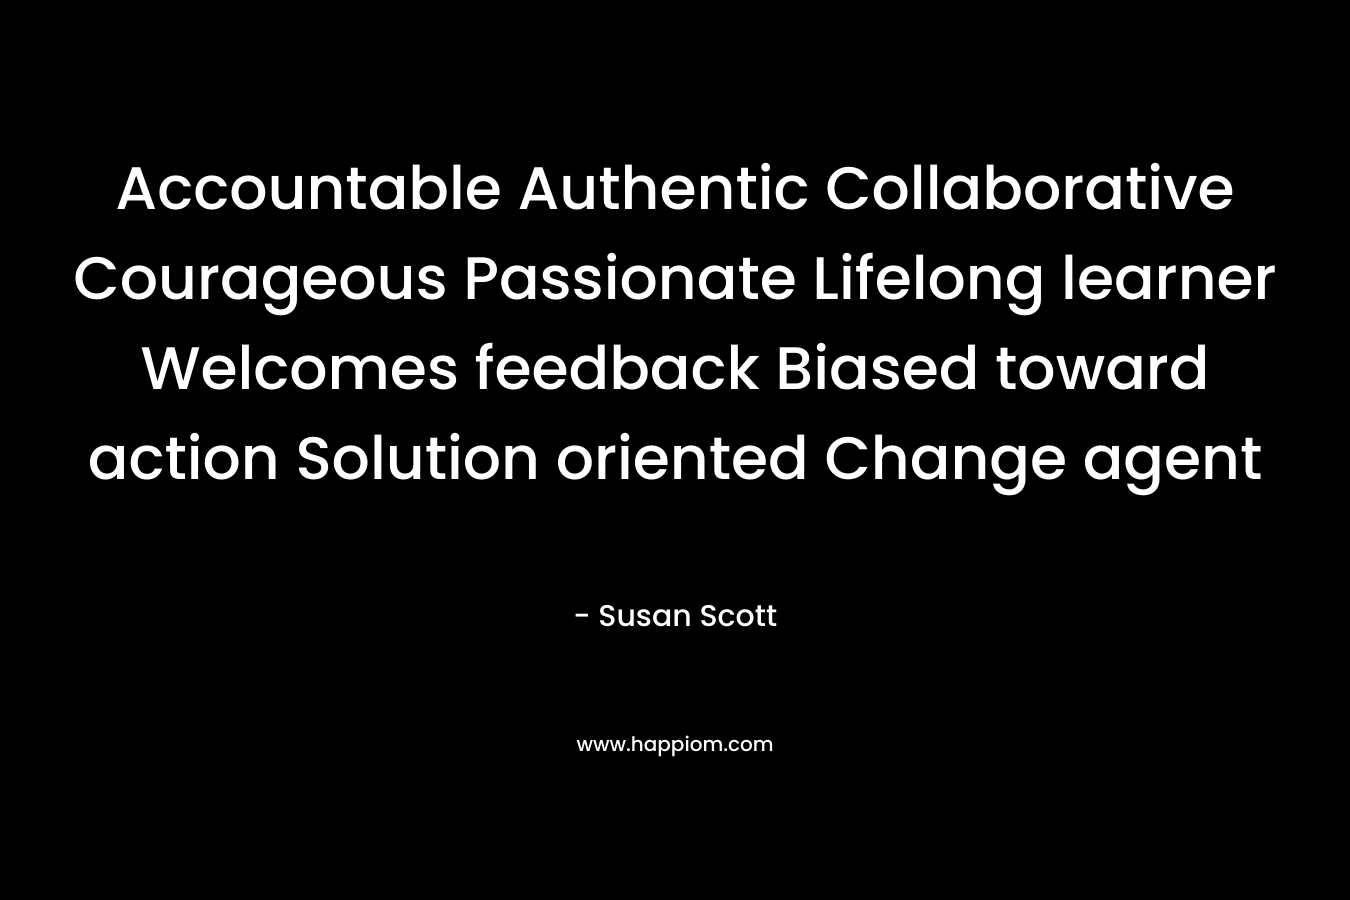 Accountable Authentic Collaborative Courageous Passionate Lifelong learner Welcomes feedback Biased toward action Solution oriented Change agent